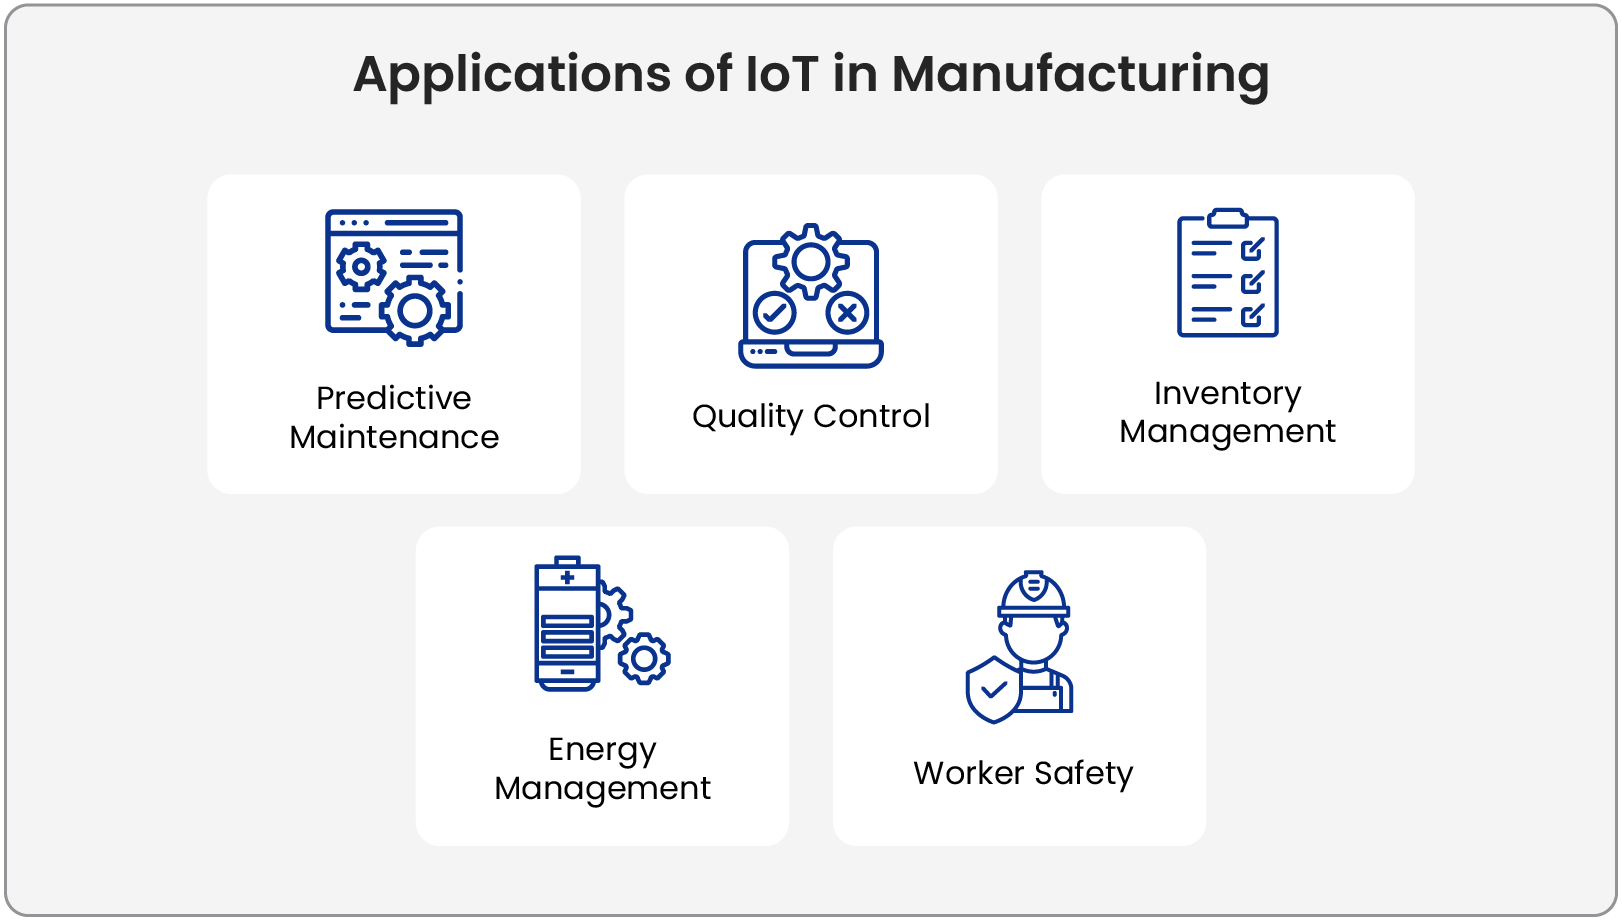 Applications of IoT in Manufacturing